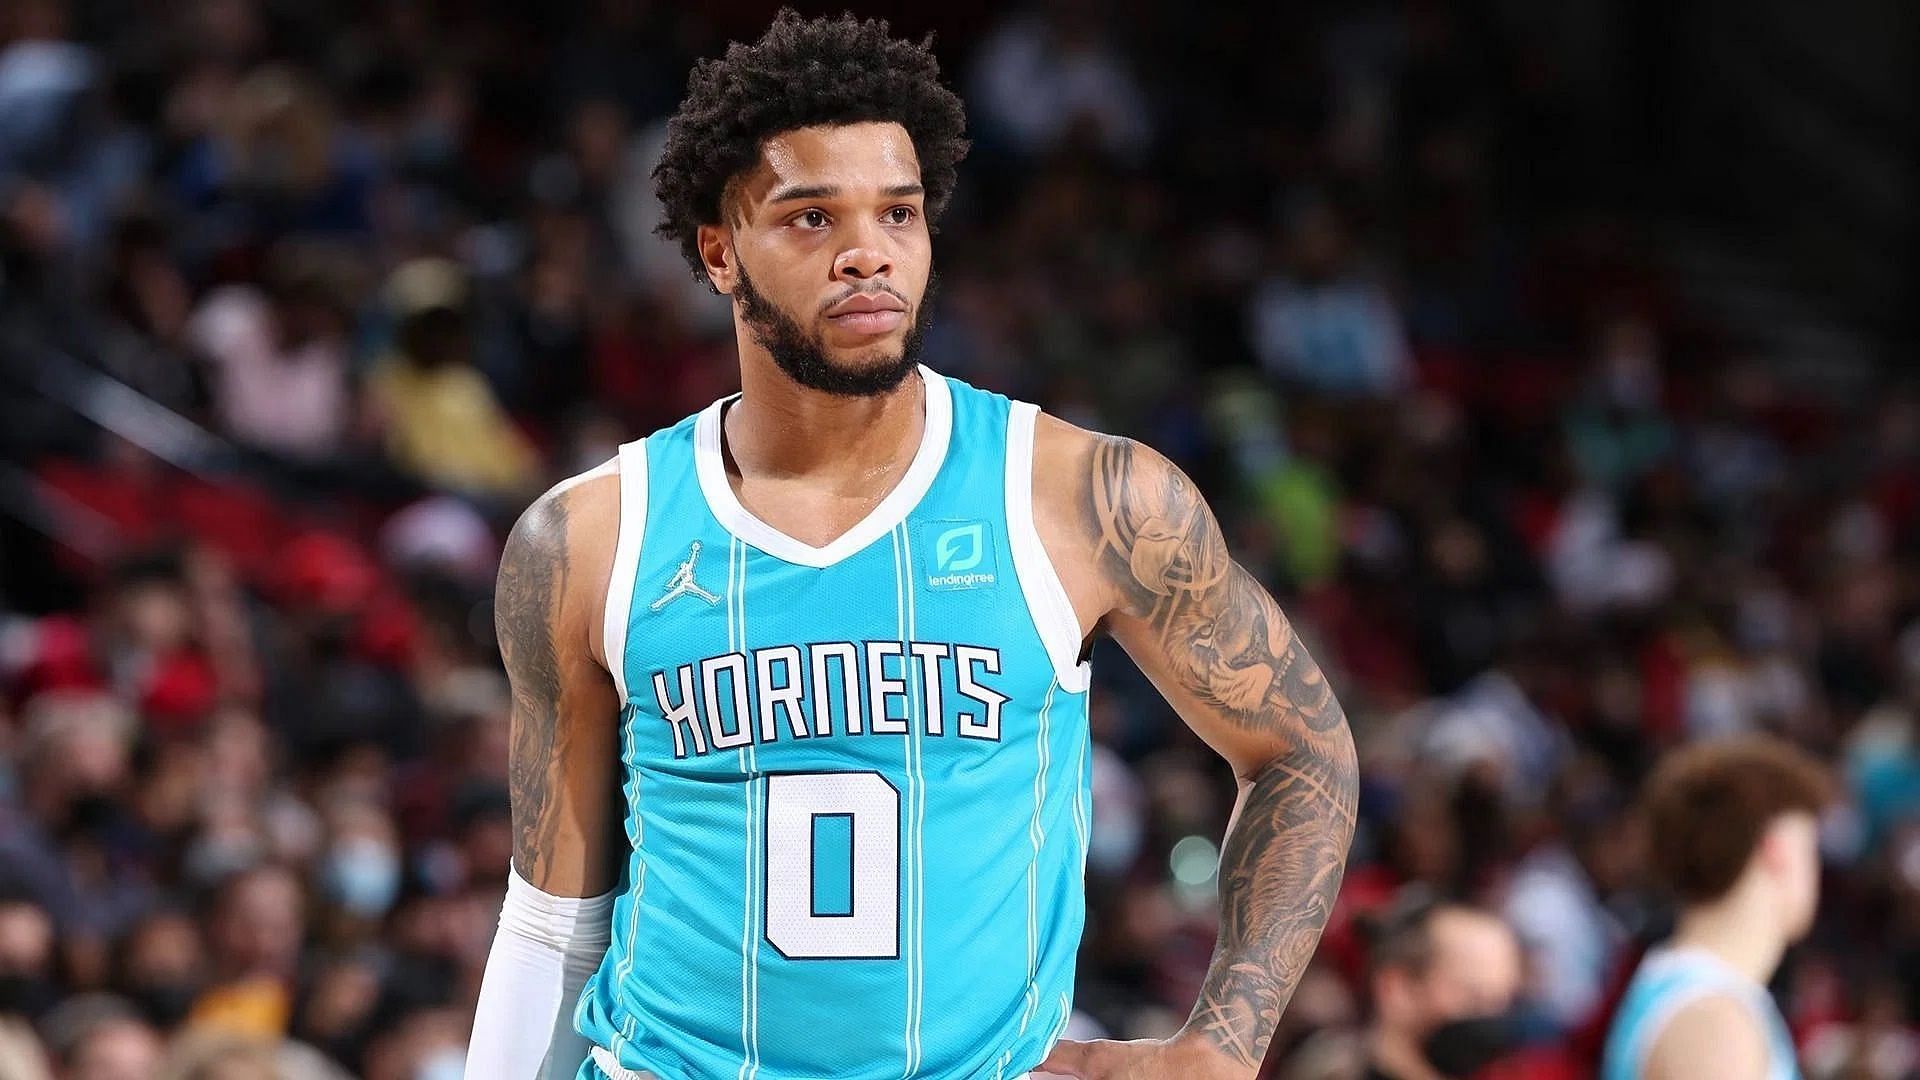 Charlotte Hornets forward Miles Bridges reportedly turned himself in to authorities after an arrest warrant was served to him in connection with a domestic violence case lodged against him last year.